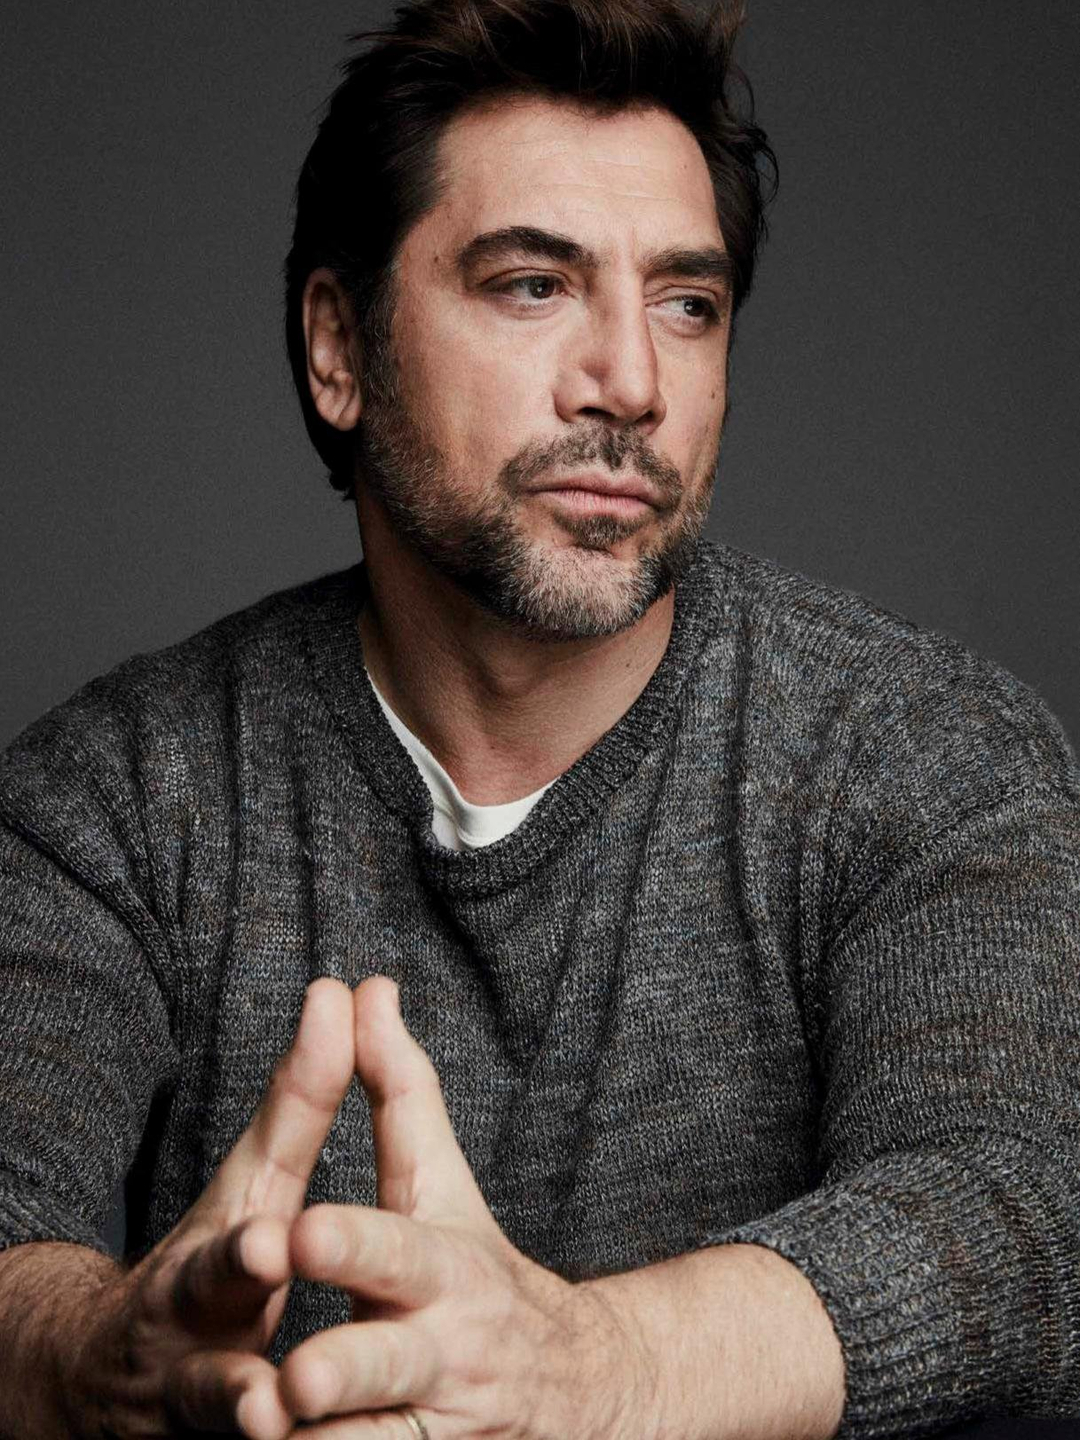 Javier Bardem who is his father